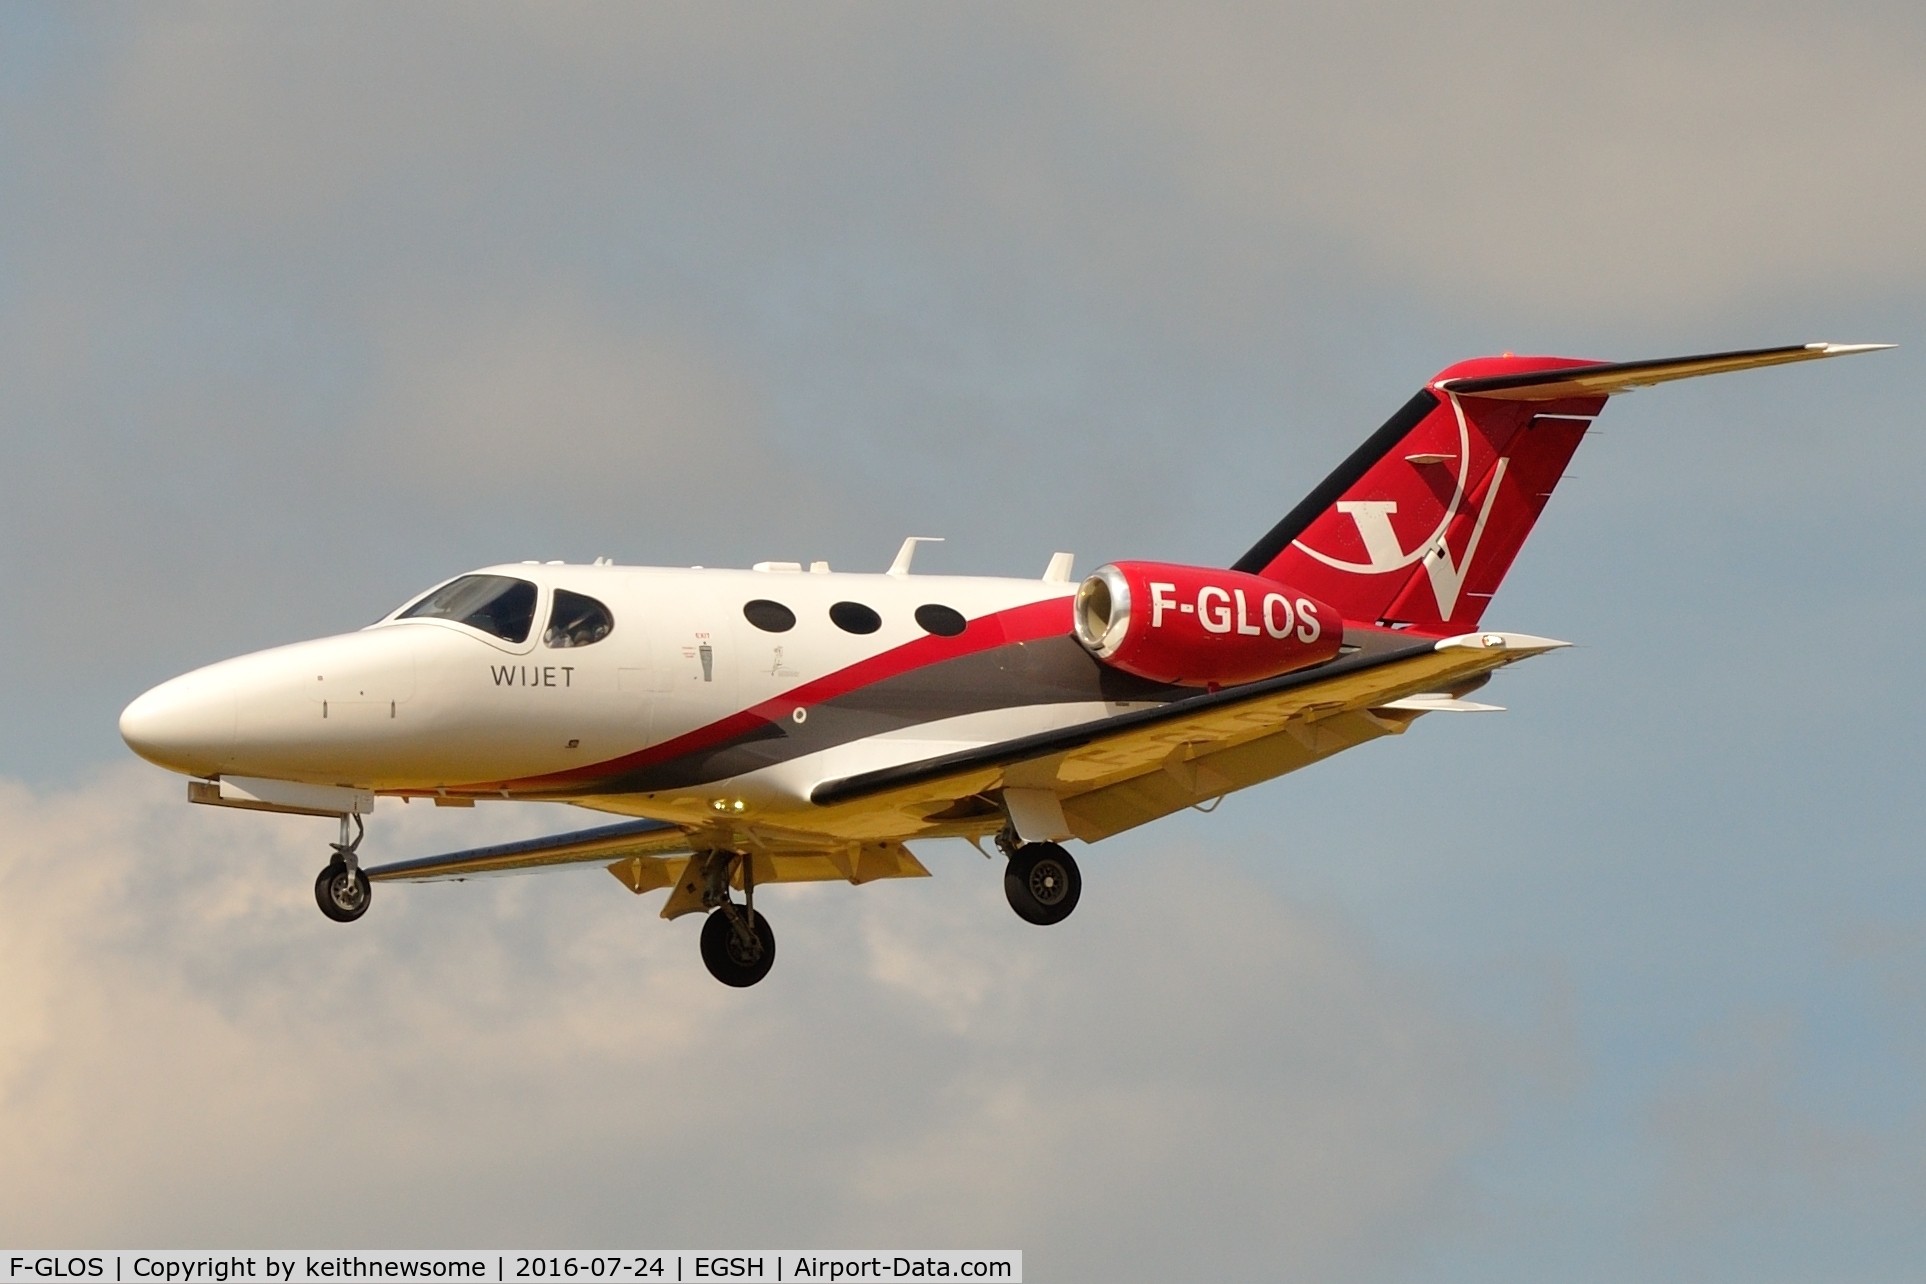 F-GLOS, 2009 Cessna 510 Citation Mustang Citation Mustang C/N 510-0169, Arriving from Cannes.